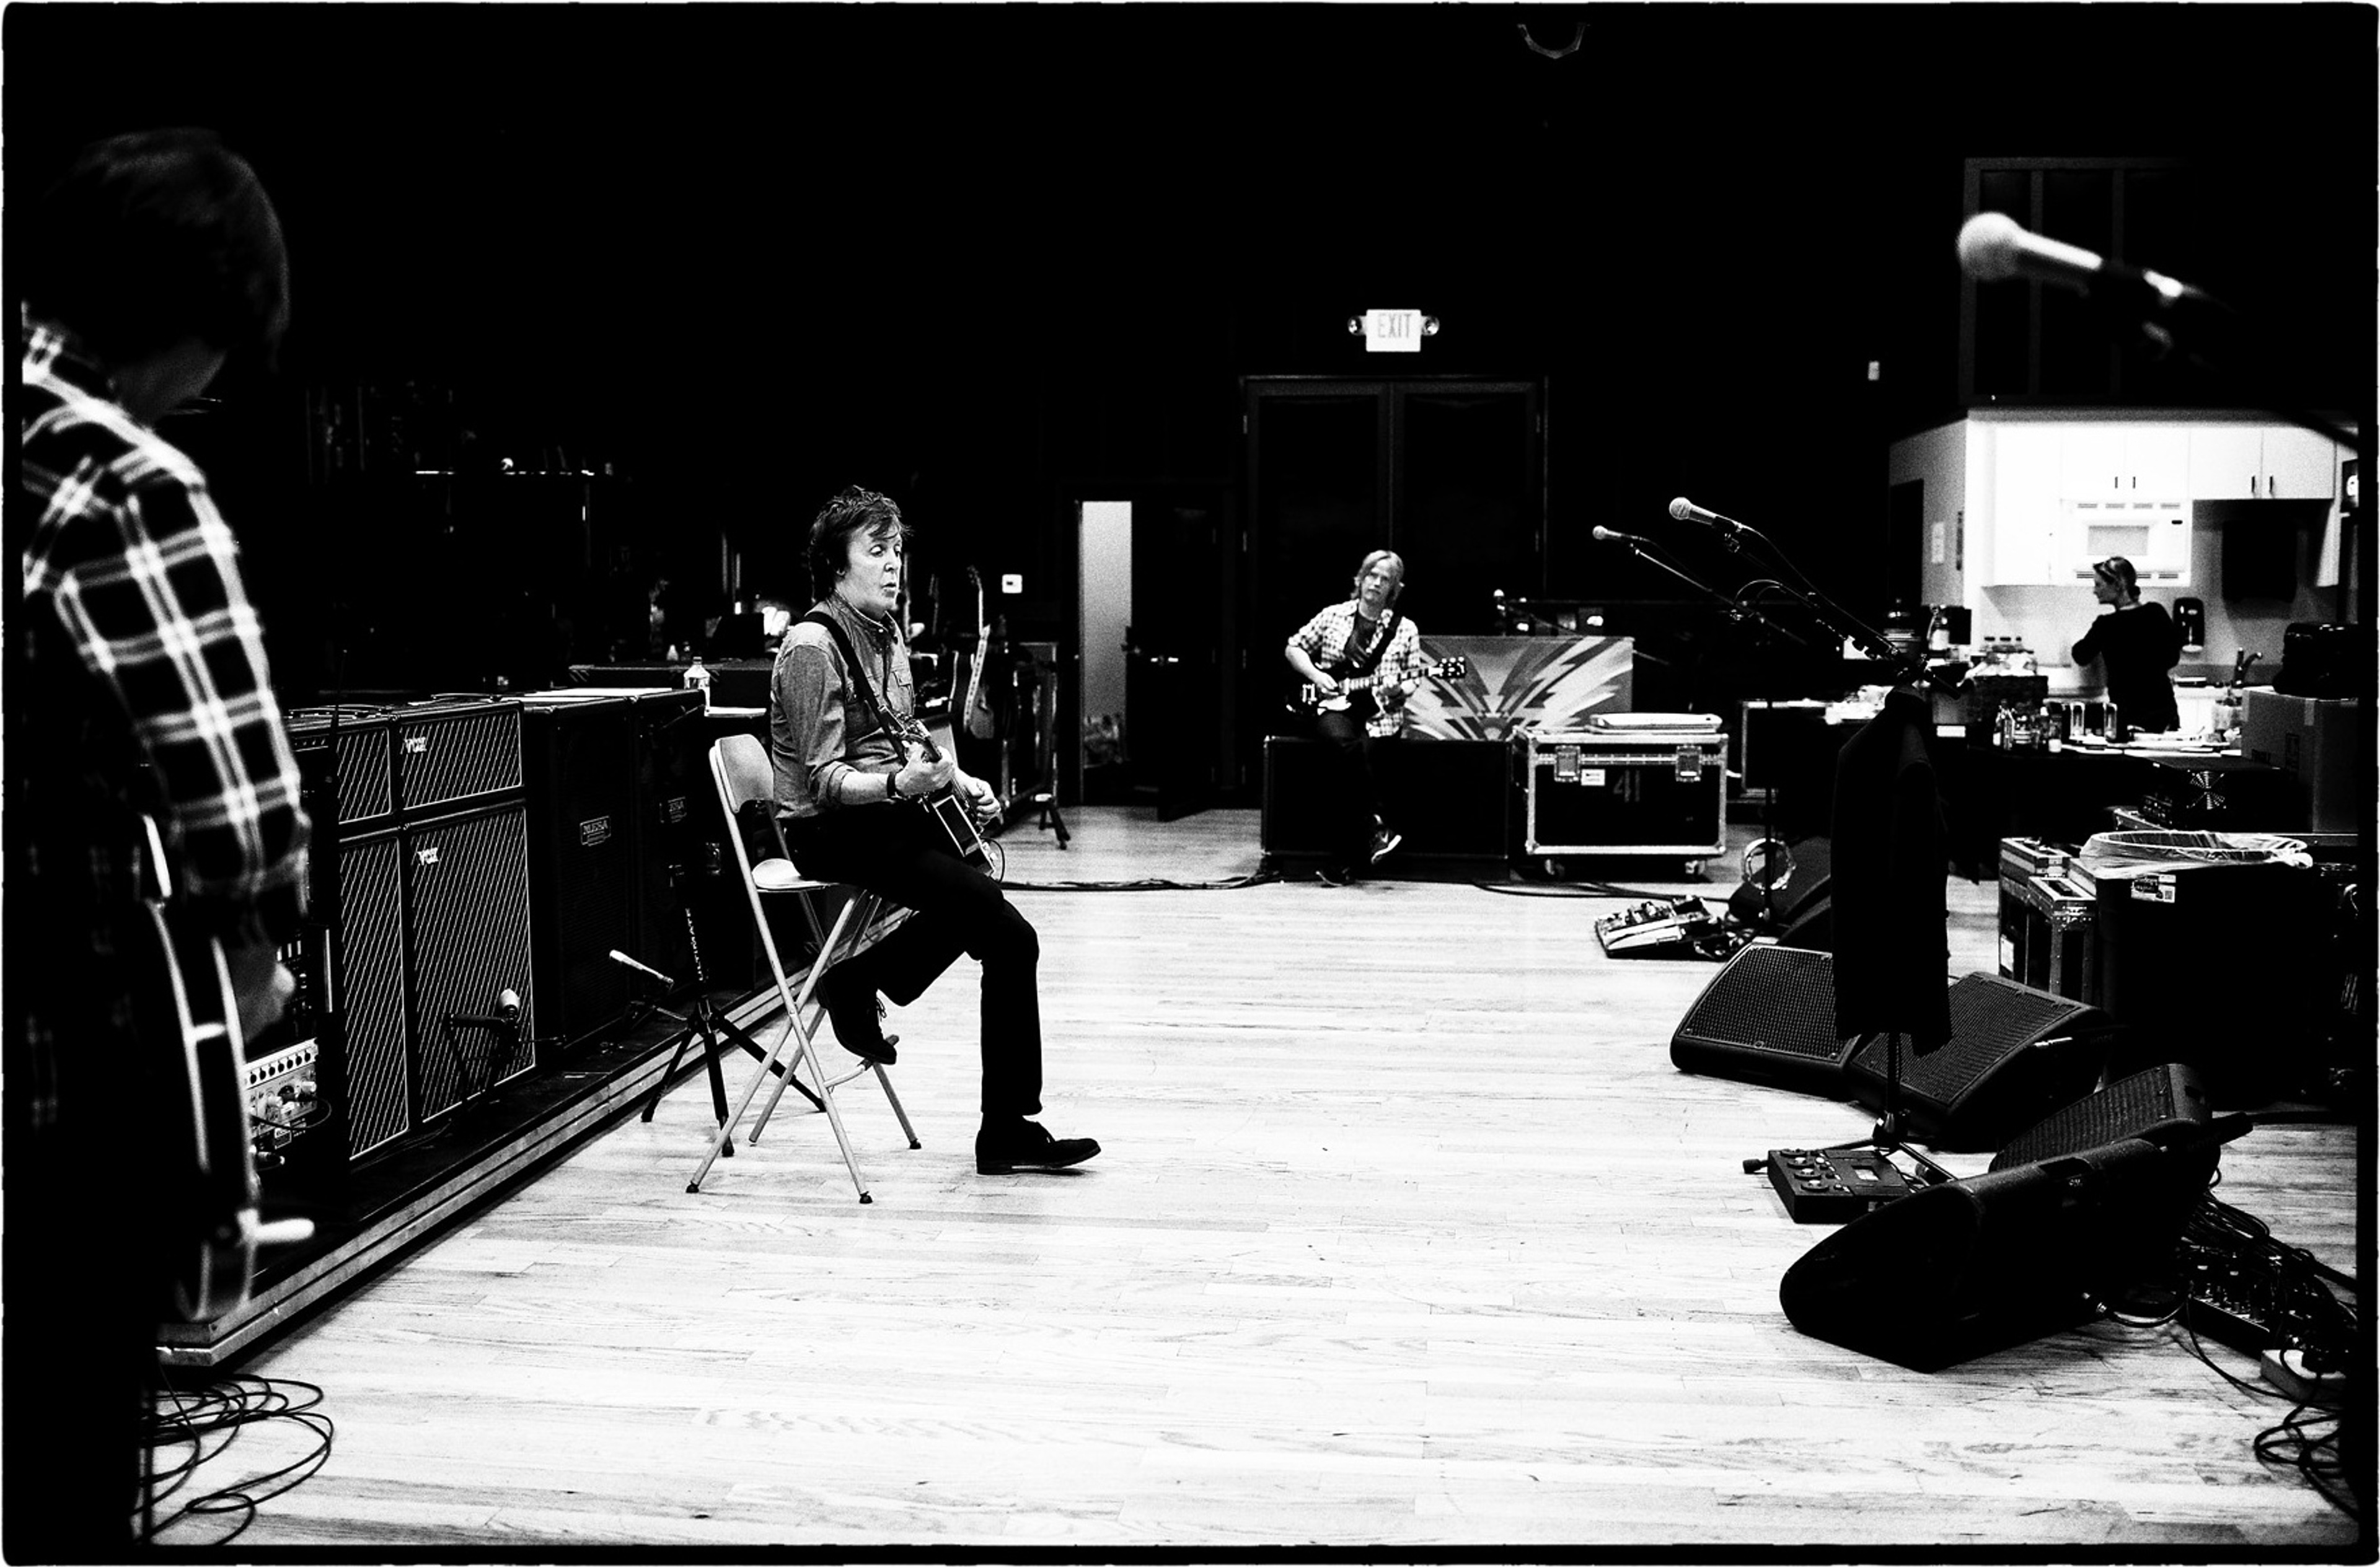 Rusty, Paul and Brian at rehearsals, Los Angeles, April 13th 2013